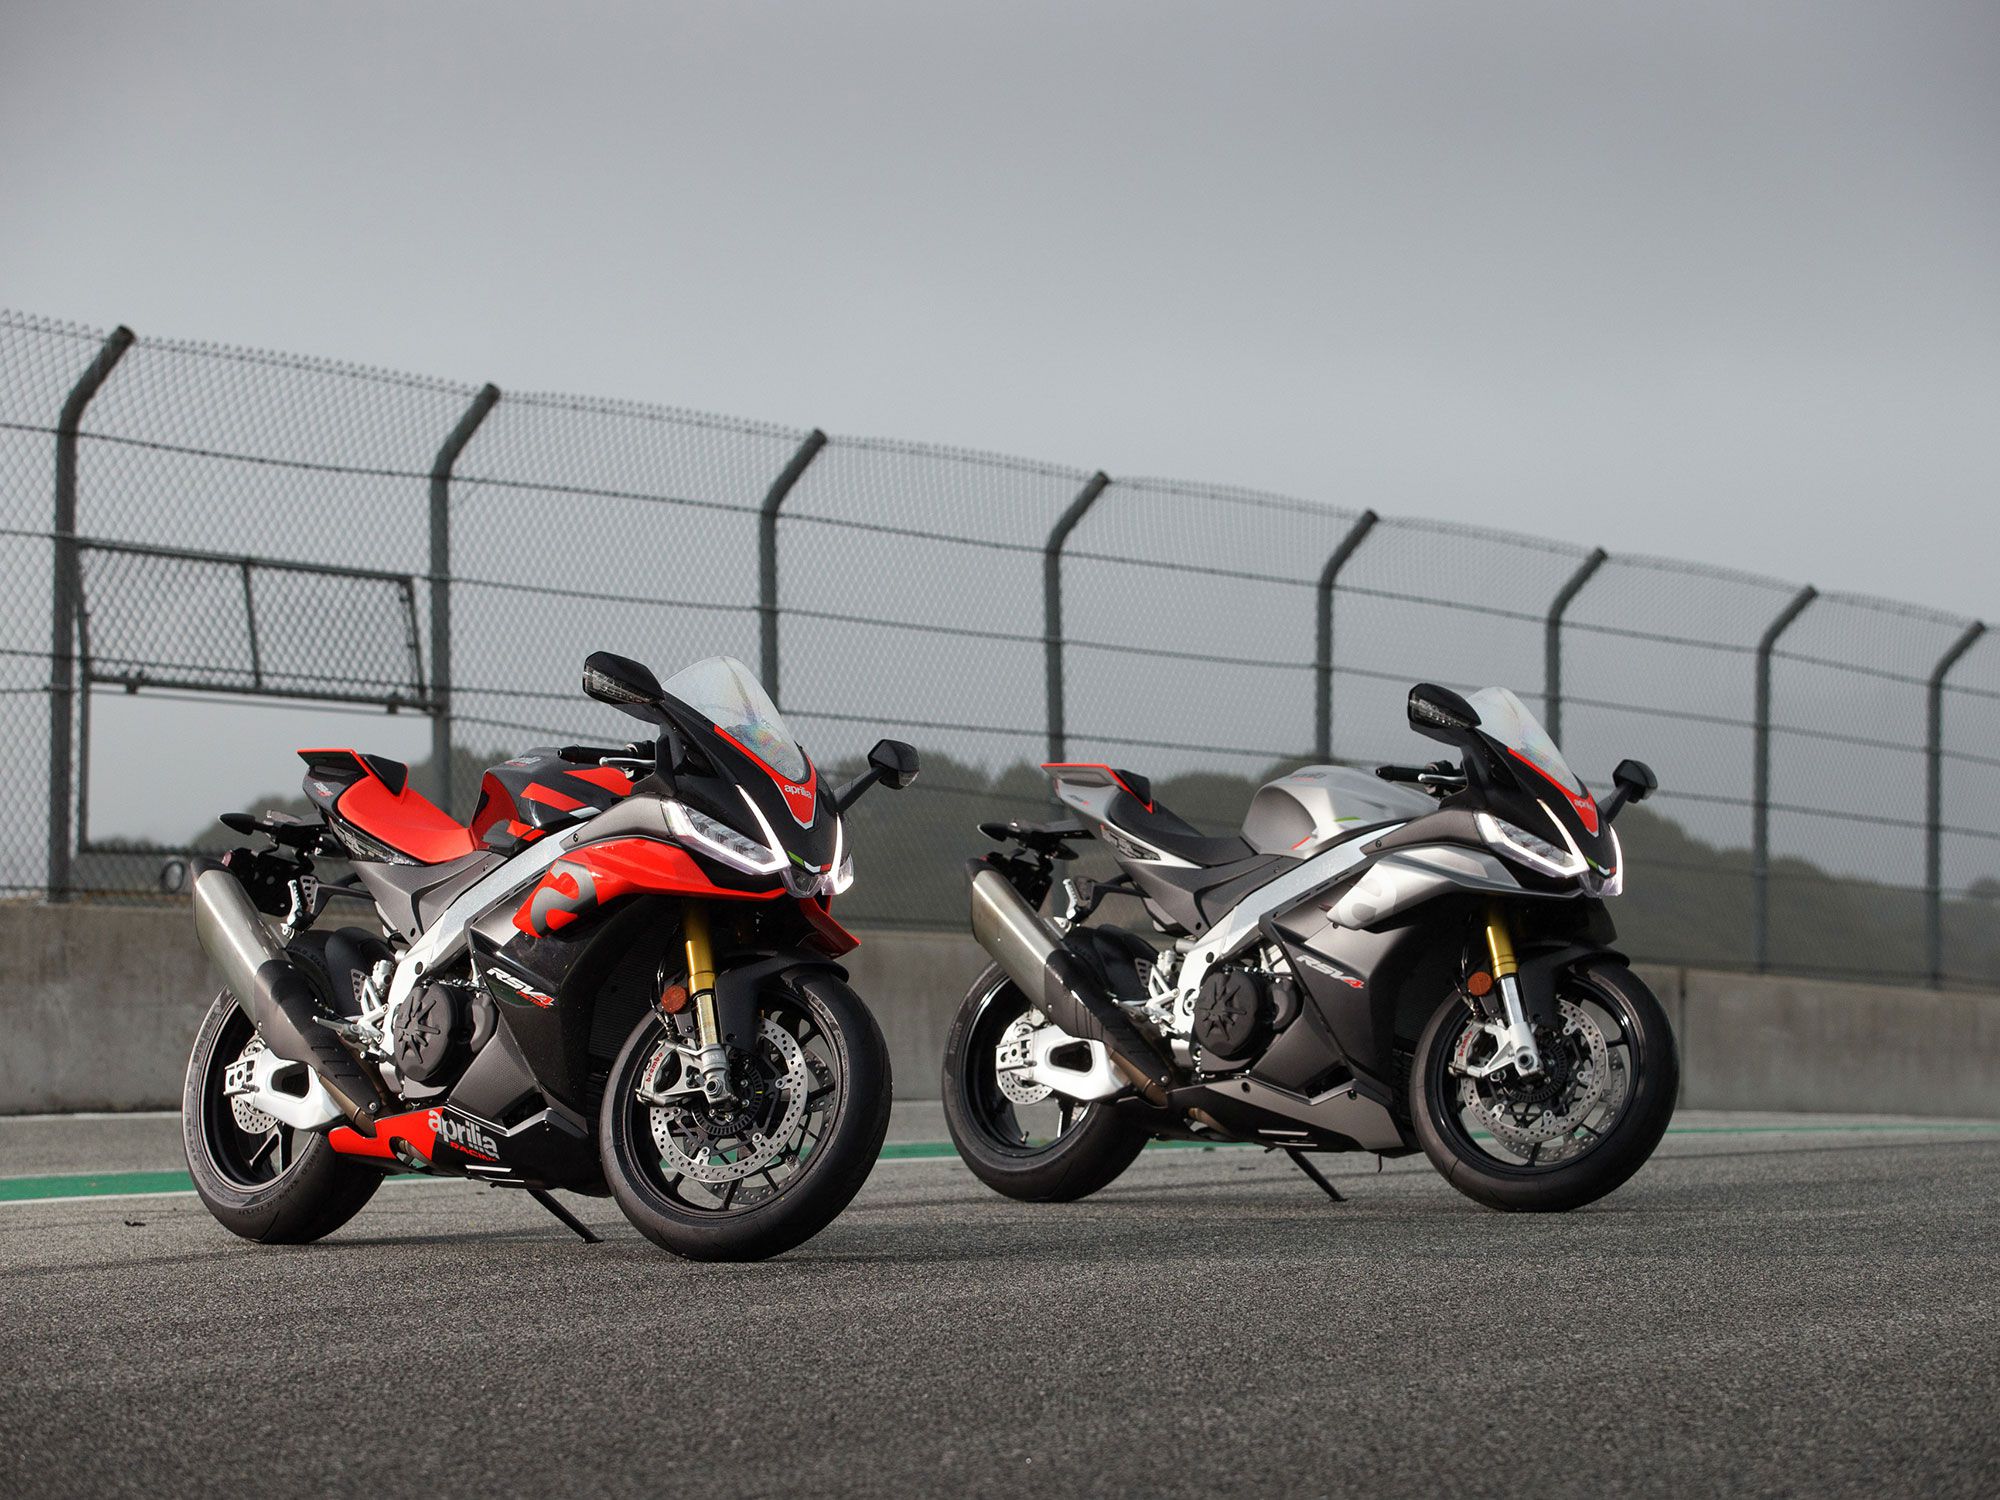 In base trim, the 2021 RSV4 ($18,999) offers incredible value in its class. Riders who want something special can step up to the $25,999 Factory model, which includes semi-active suspension from Öhlins and forged aluminum rims.